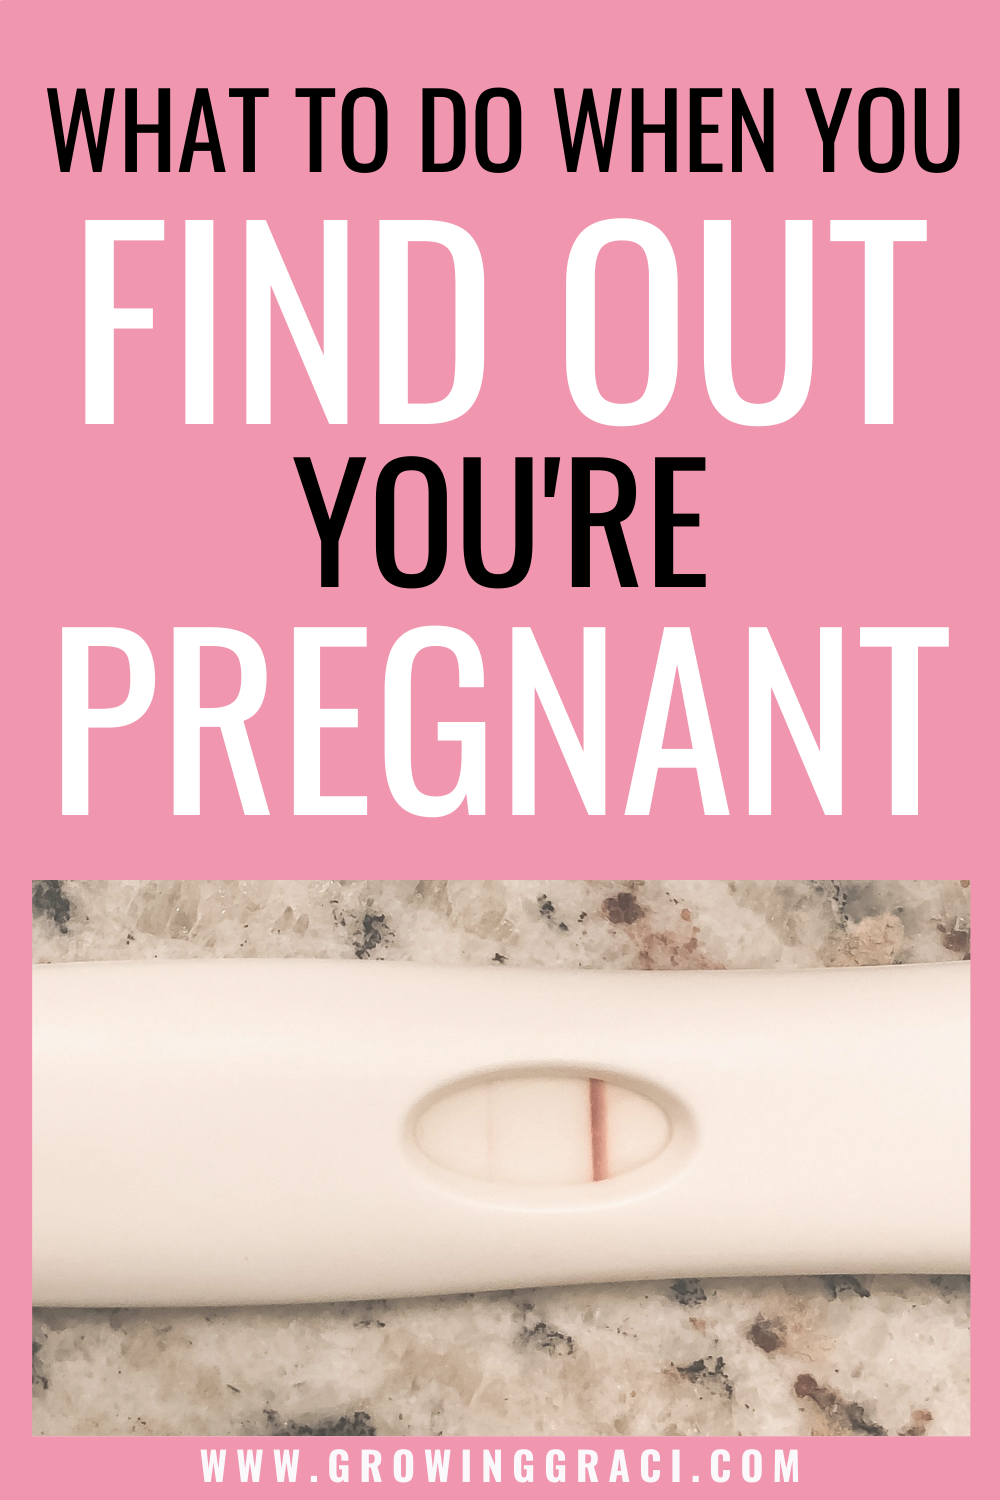 5 Things To Do When You Find Out You’re Pregnant - Growing Graci